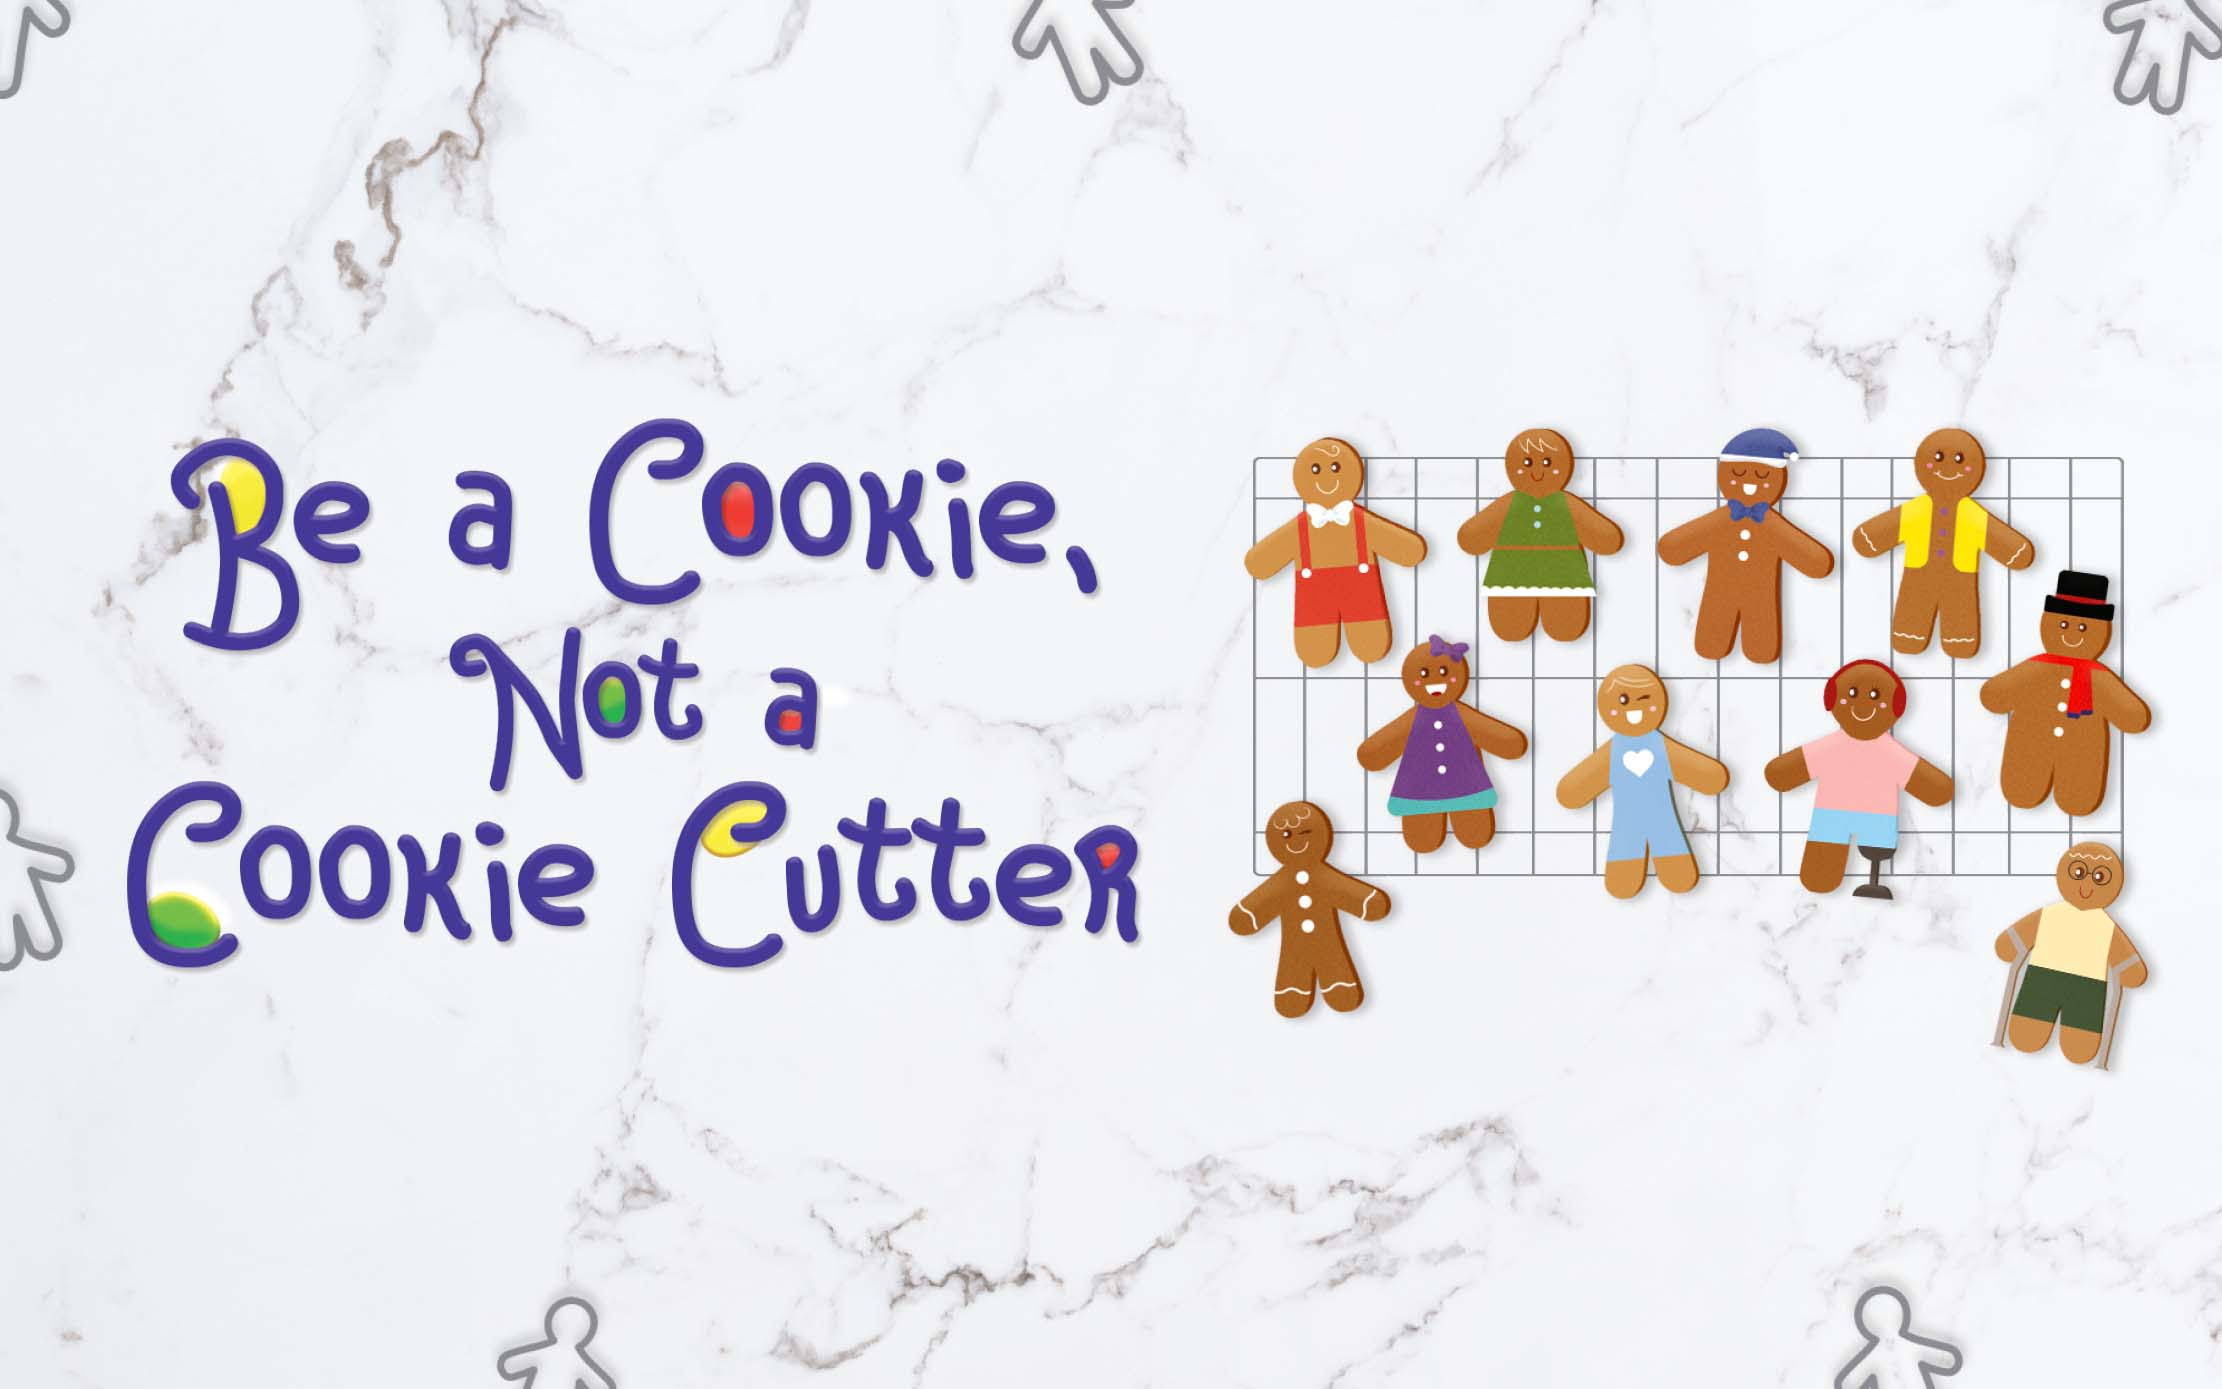 Image of gingerbread cookies with the title "Be a cookie not a cookie cutter"